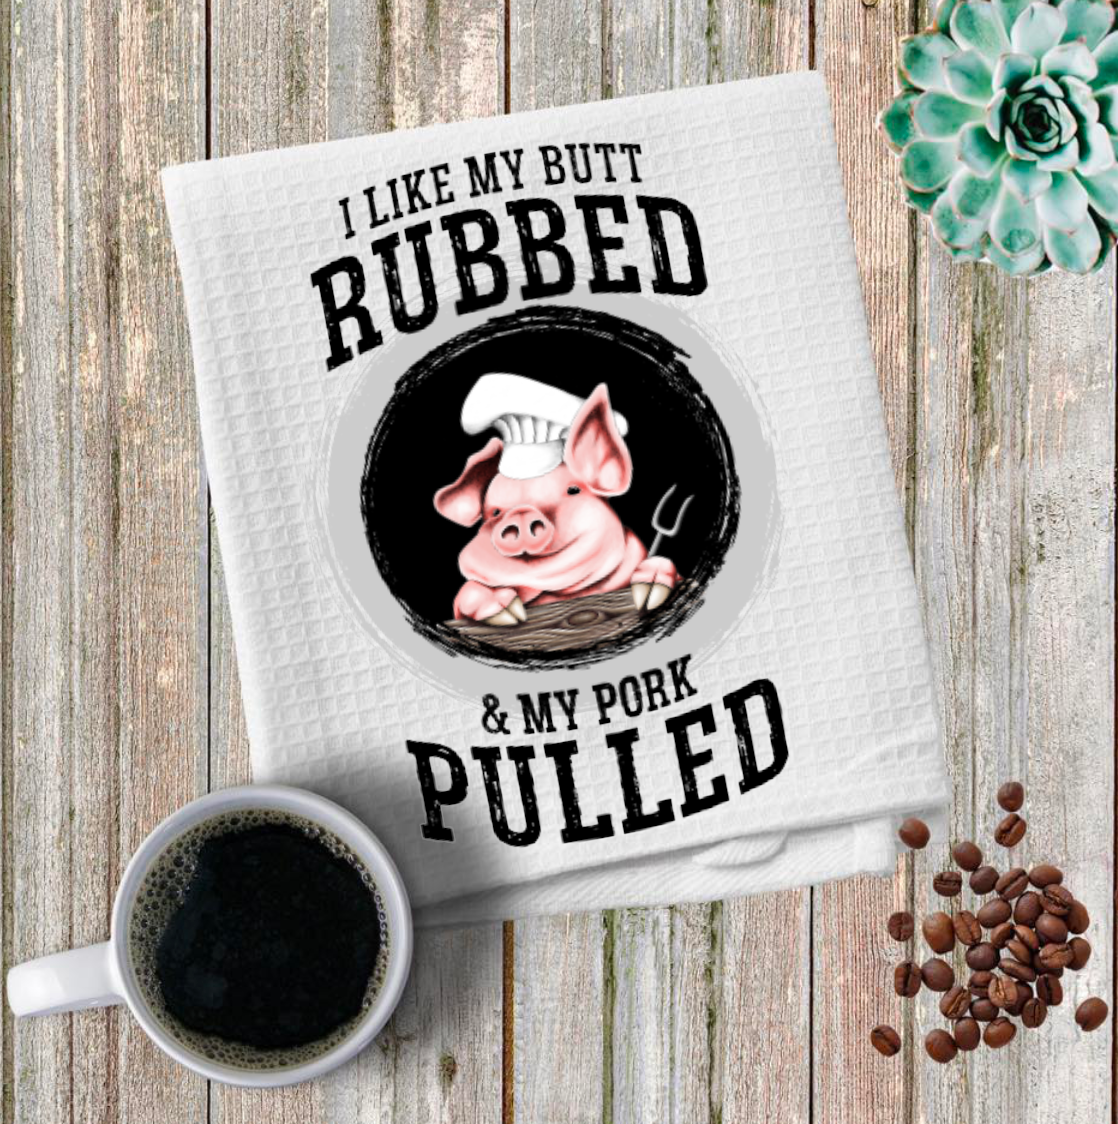 I like my butt rubbed and pork Pulled towel